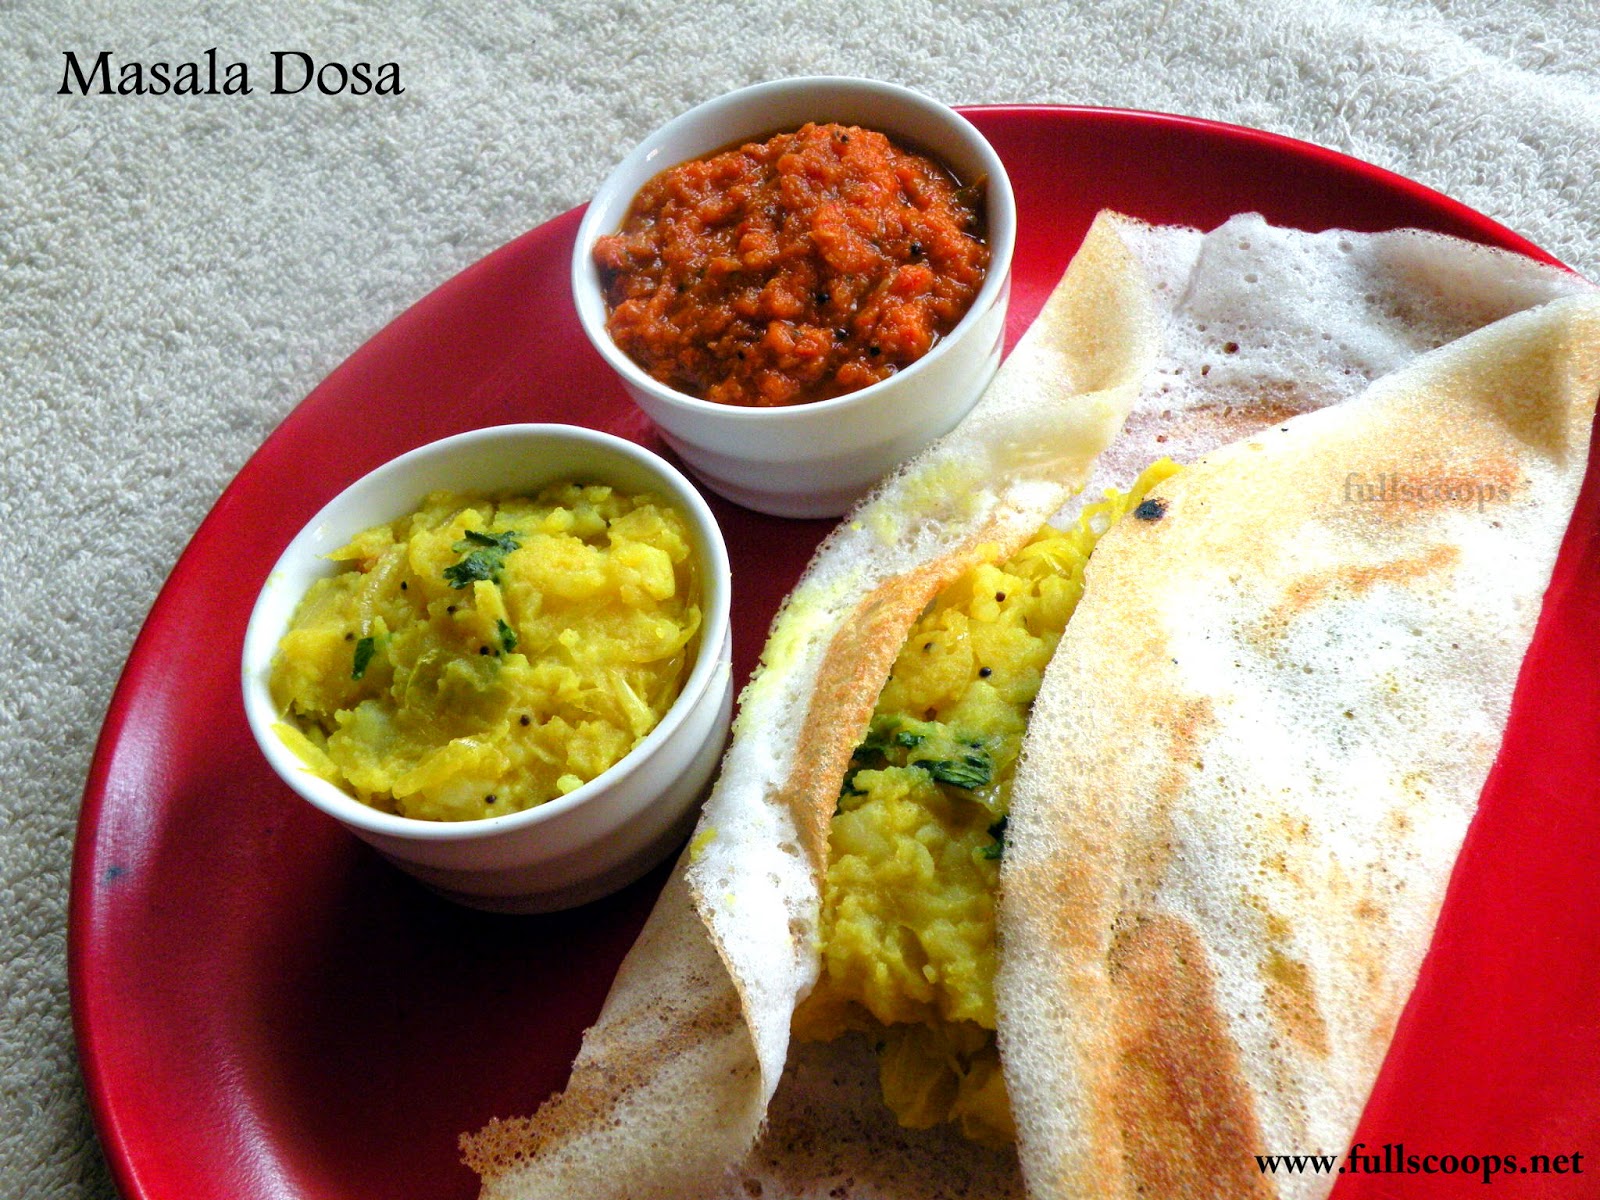 Masala Dosa Recipe ~ Full Scoops - A food blog with easy,simple & tasty